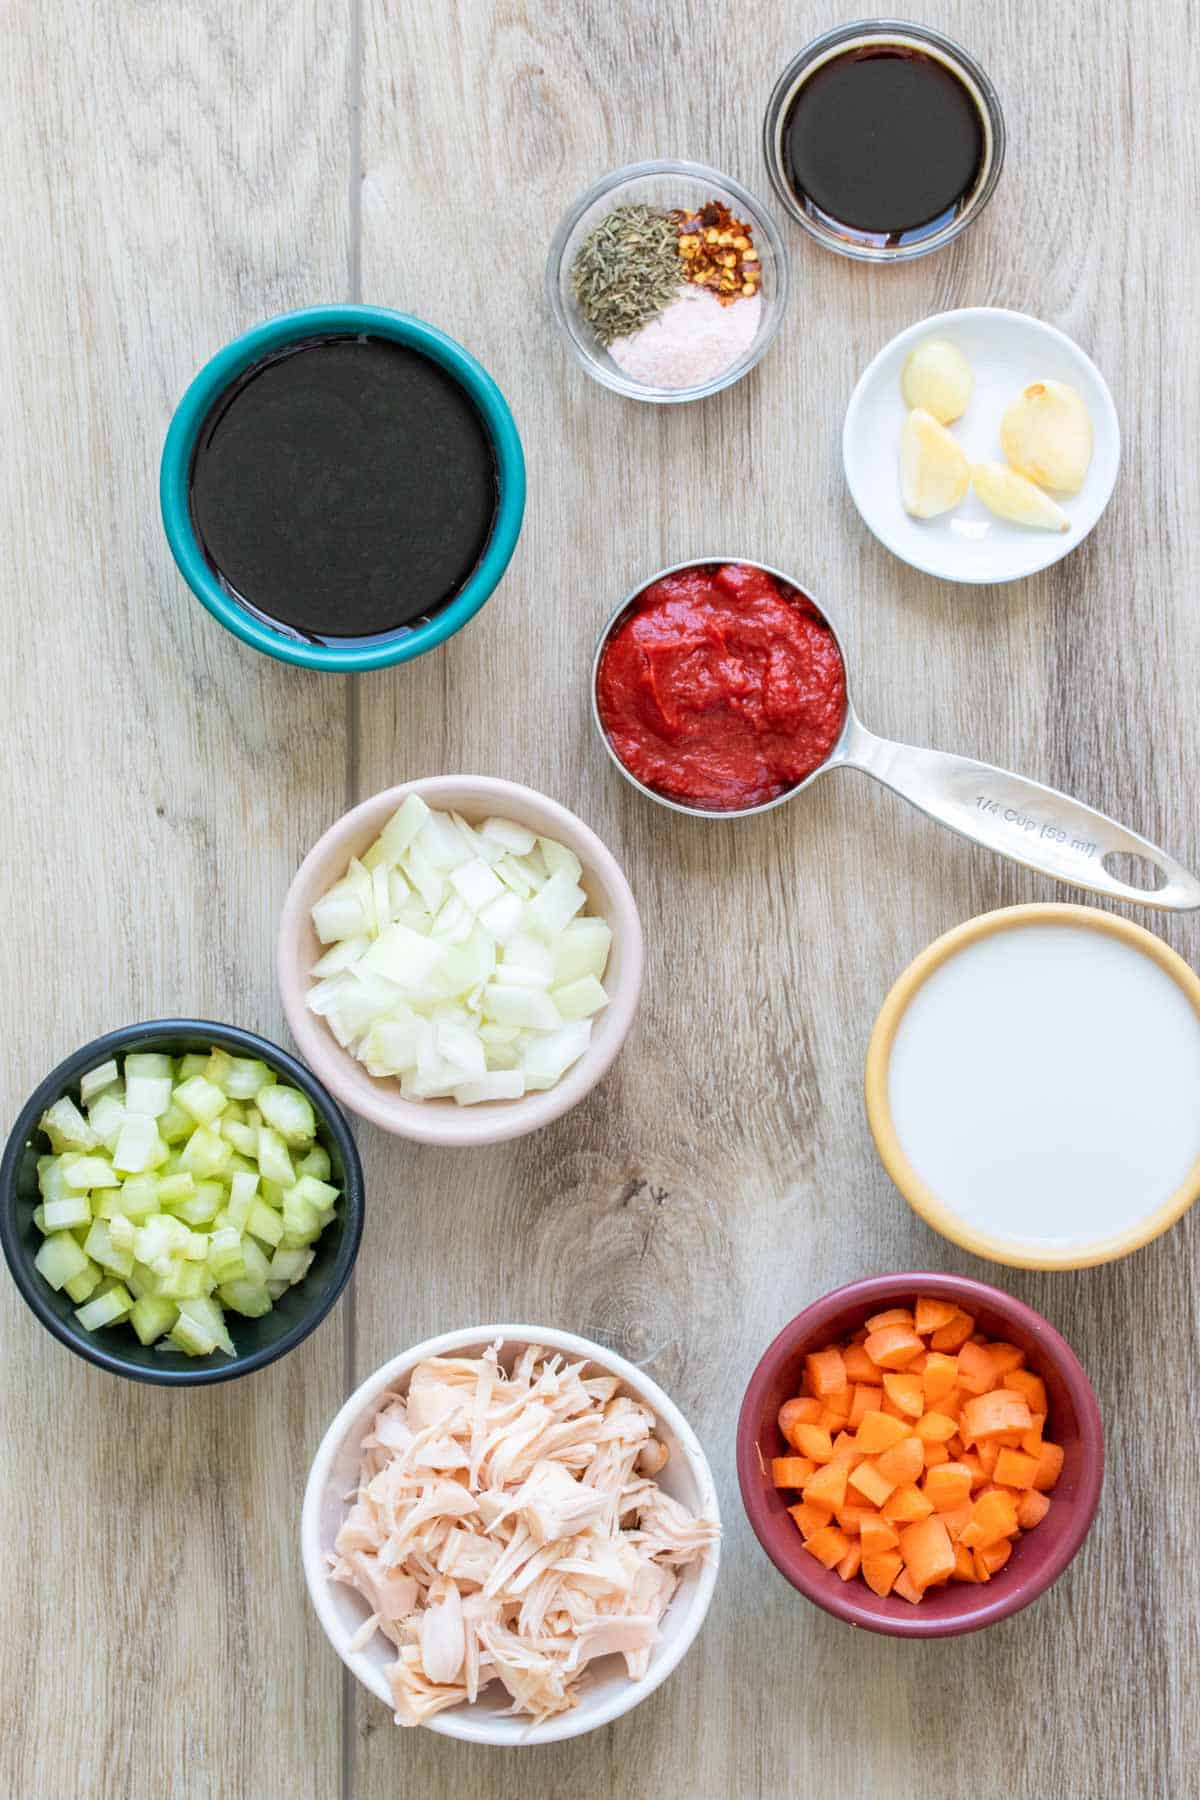 Bowls of ingredients needed to make a vegetable bolognese sauce on a wooden surface